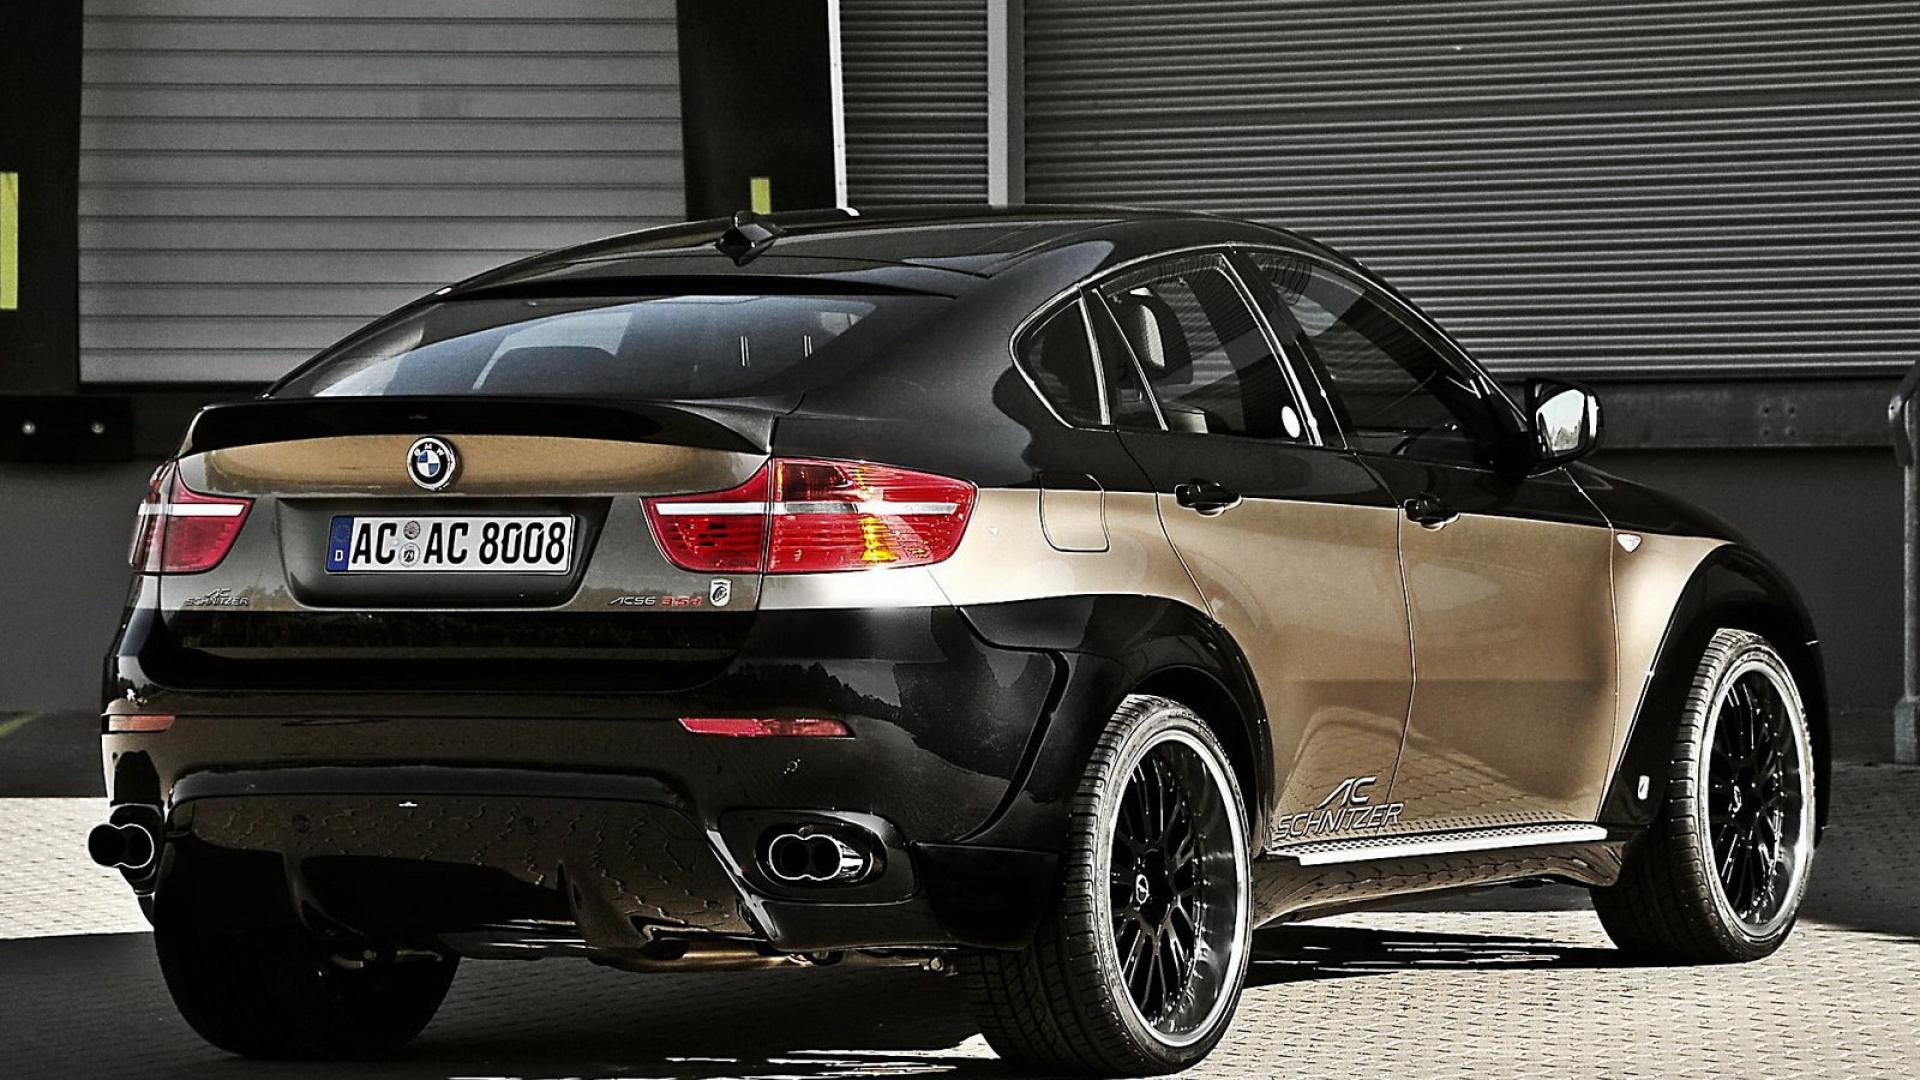 Bmw X6 Wallpaper High Resolution Category Cars HD